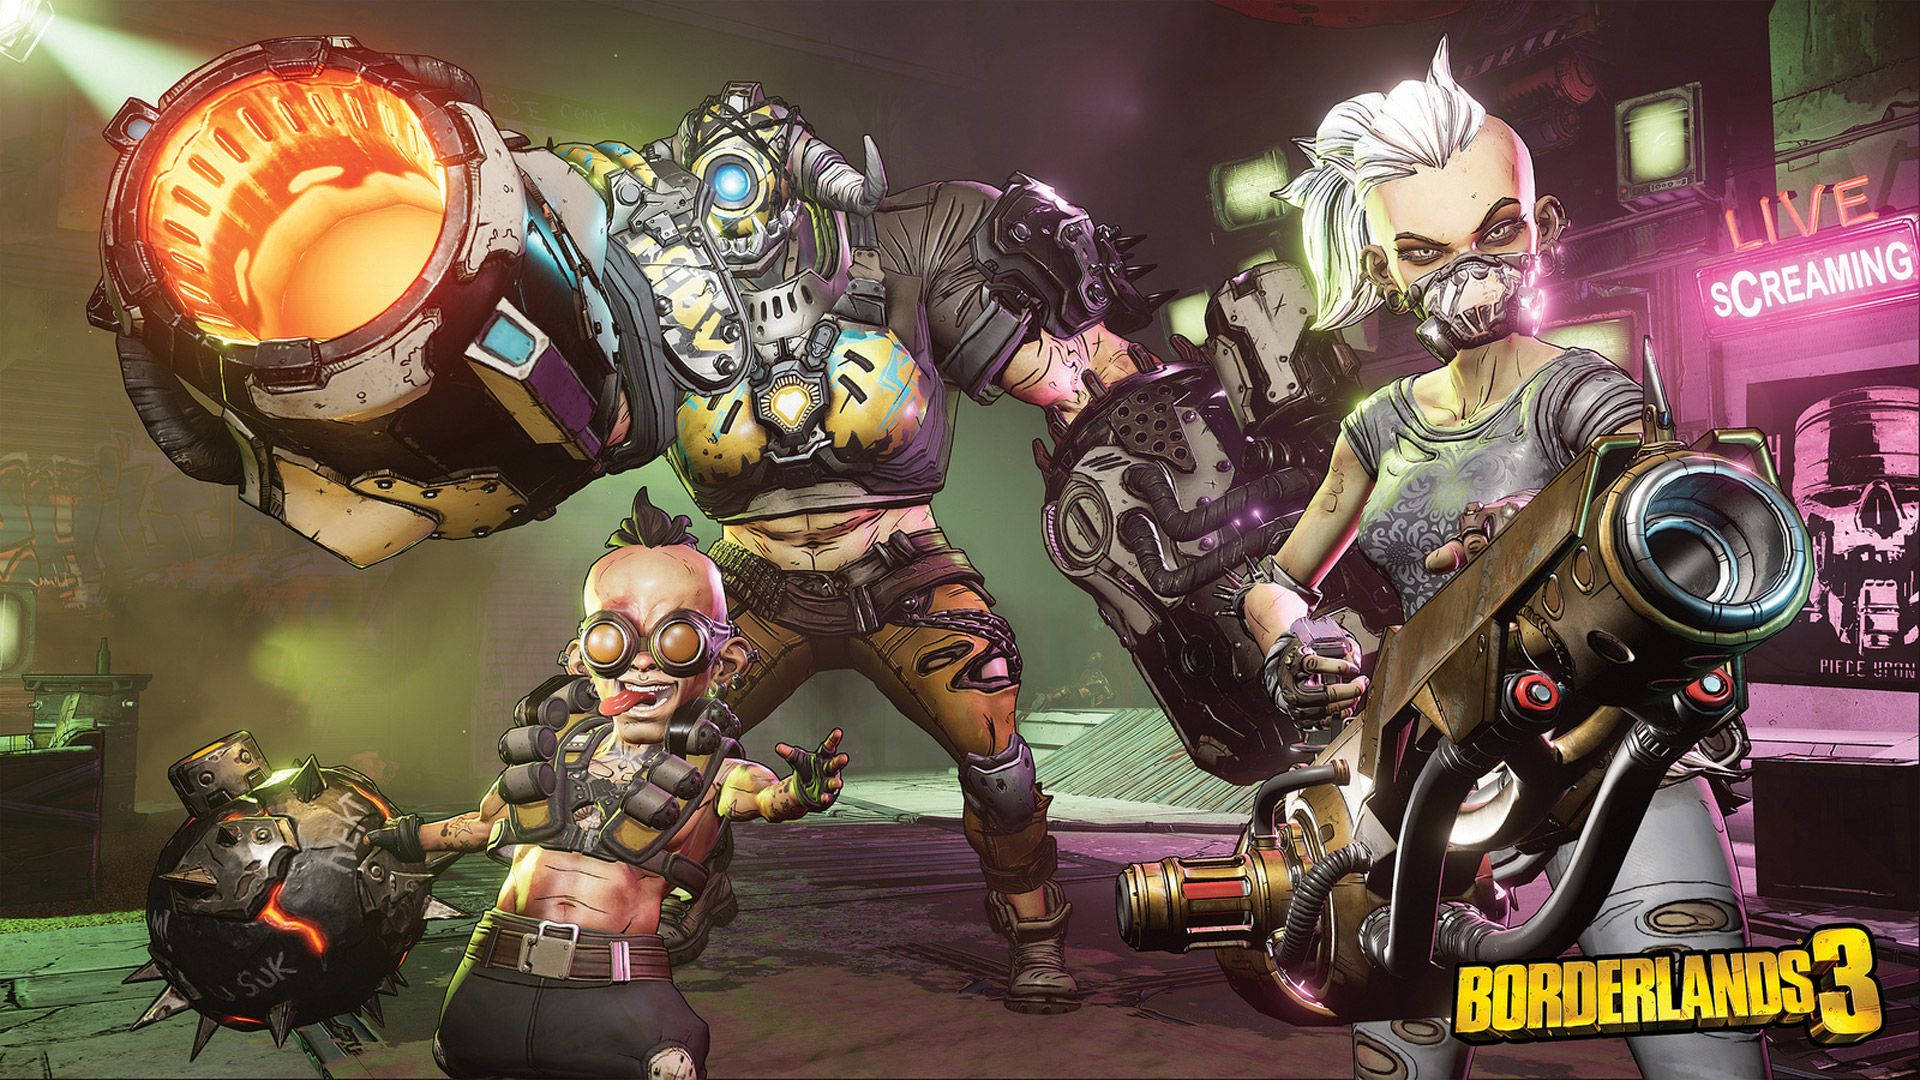 “Experience Chaos in Borderlands 3” Wallpaper